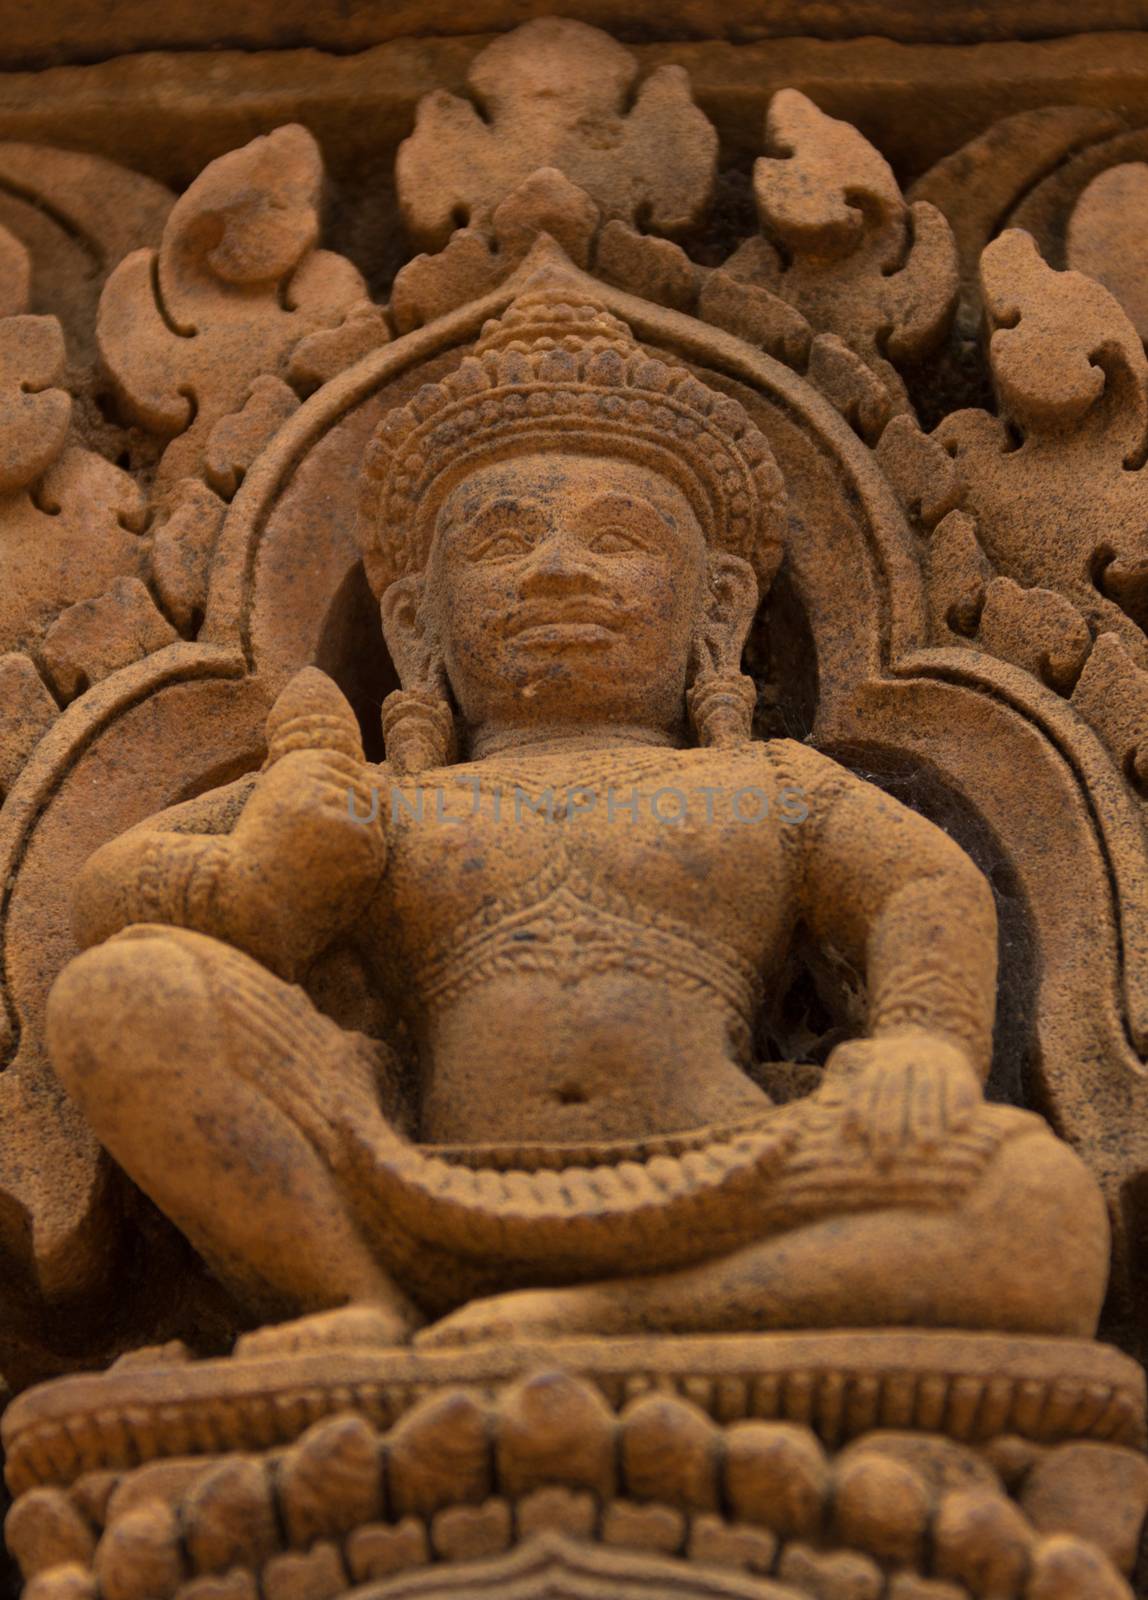 Bas-Relief at Bantey Srey Temple showing an God